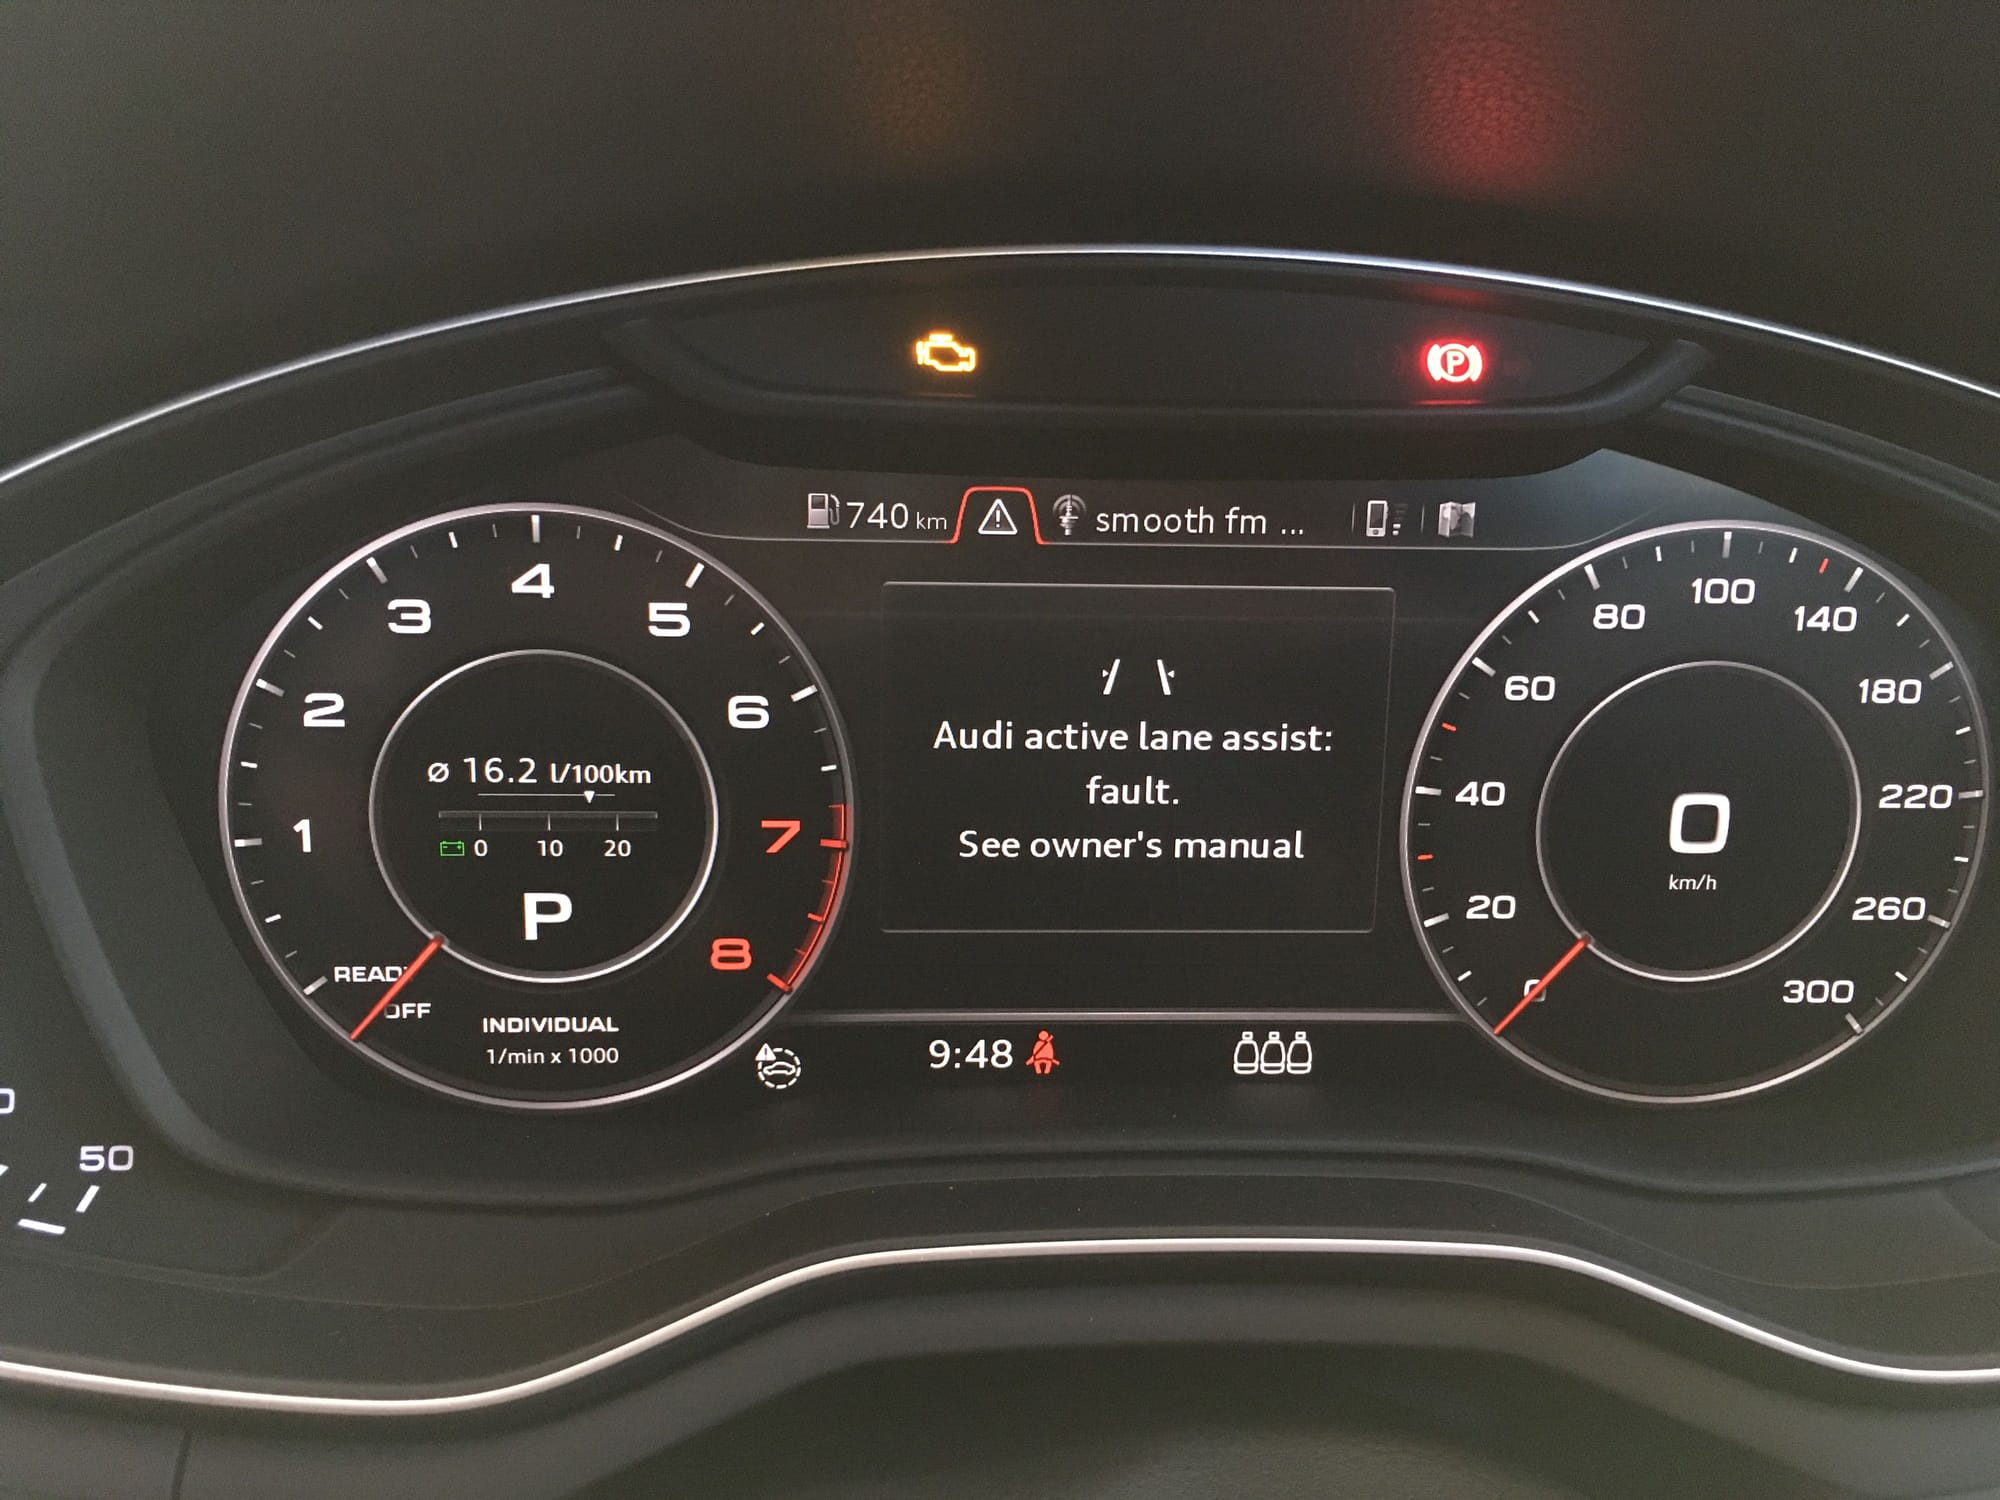 Coding for turning on Audi Active Lane Assist (all cars with pre sense